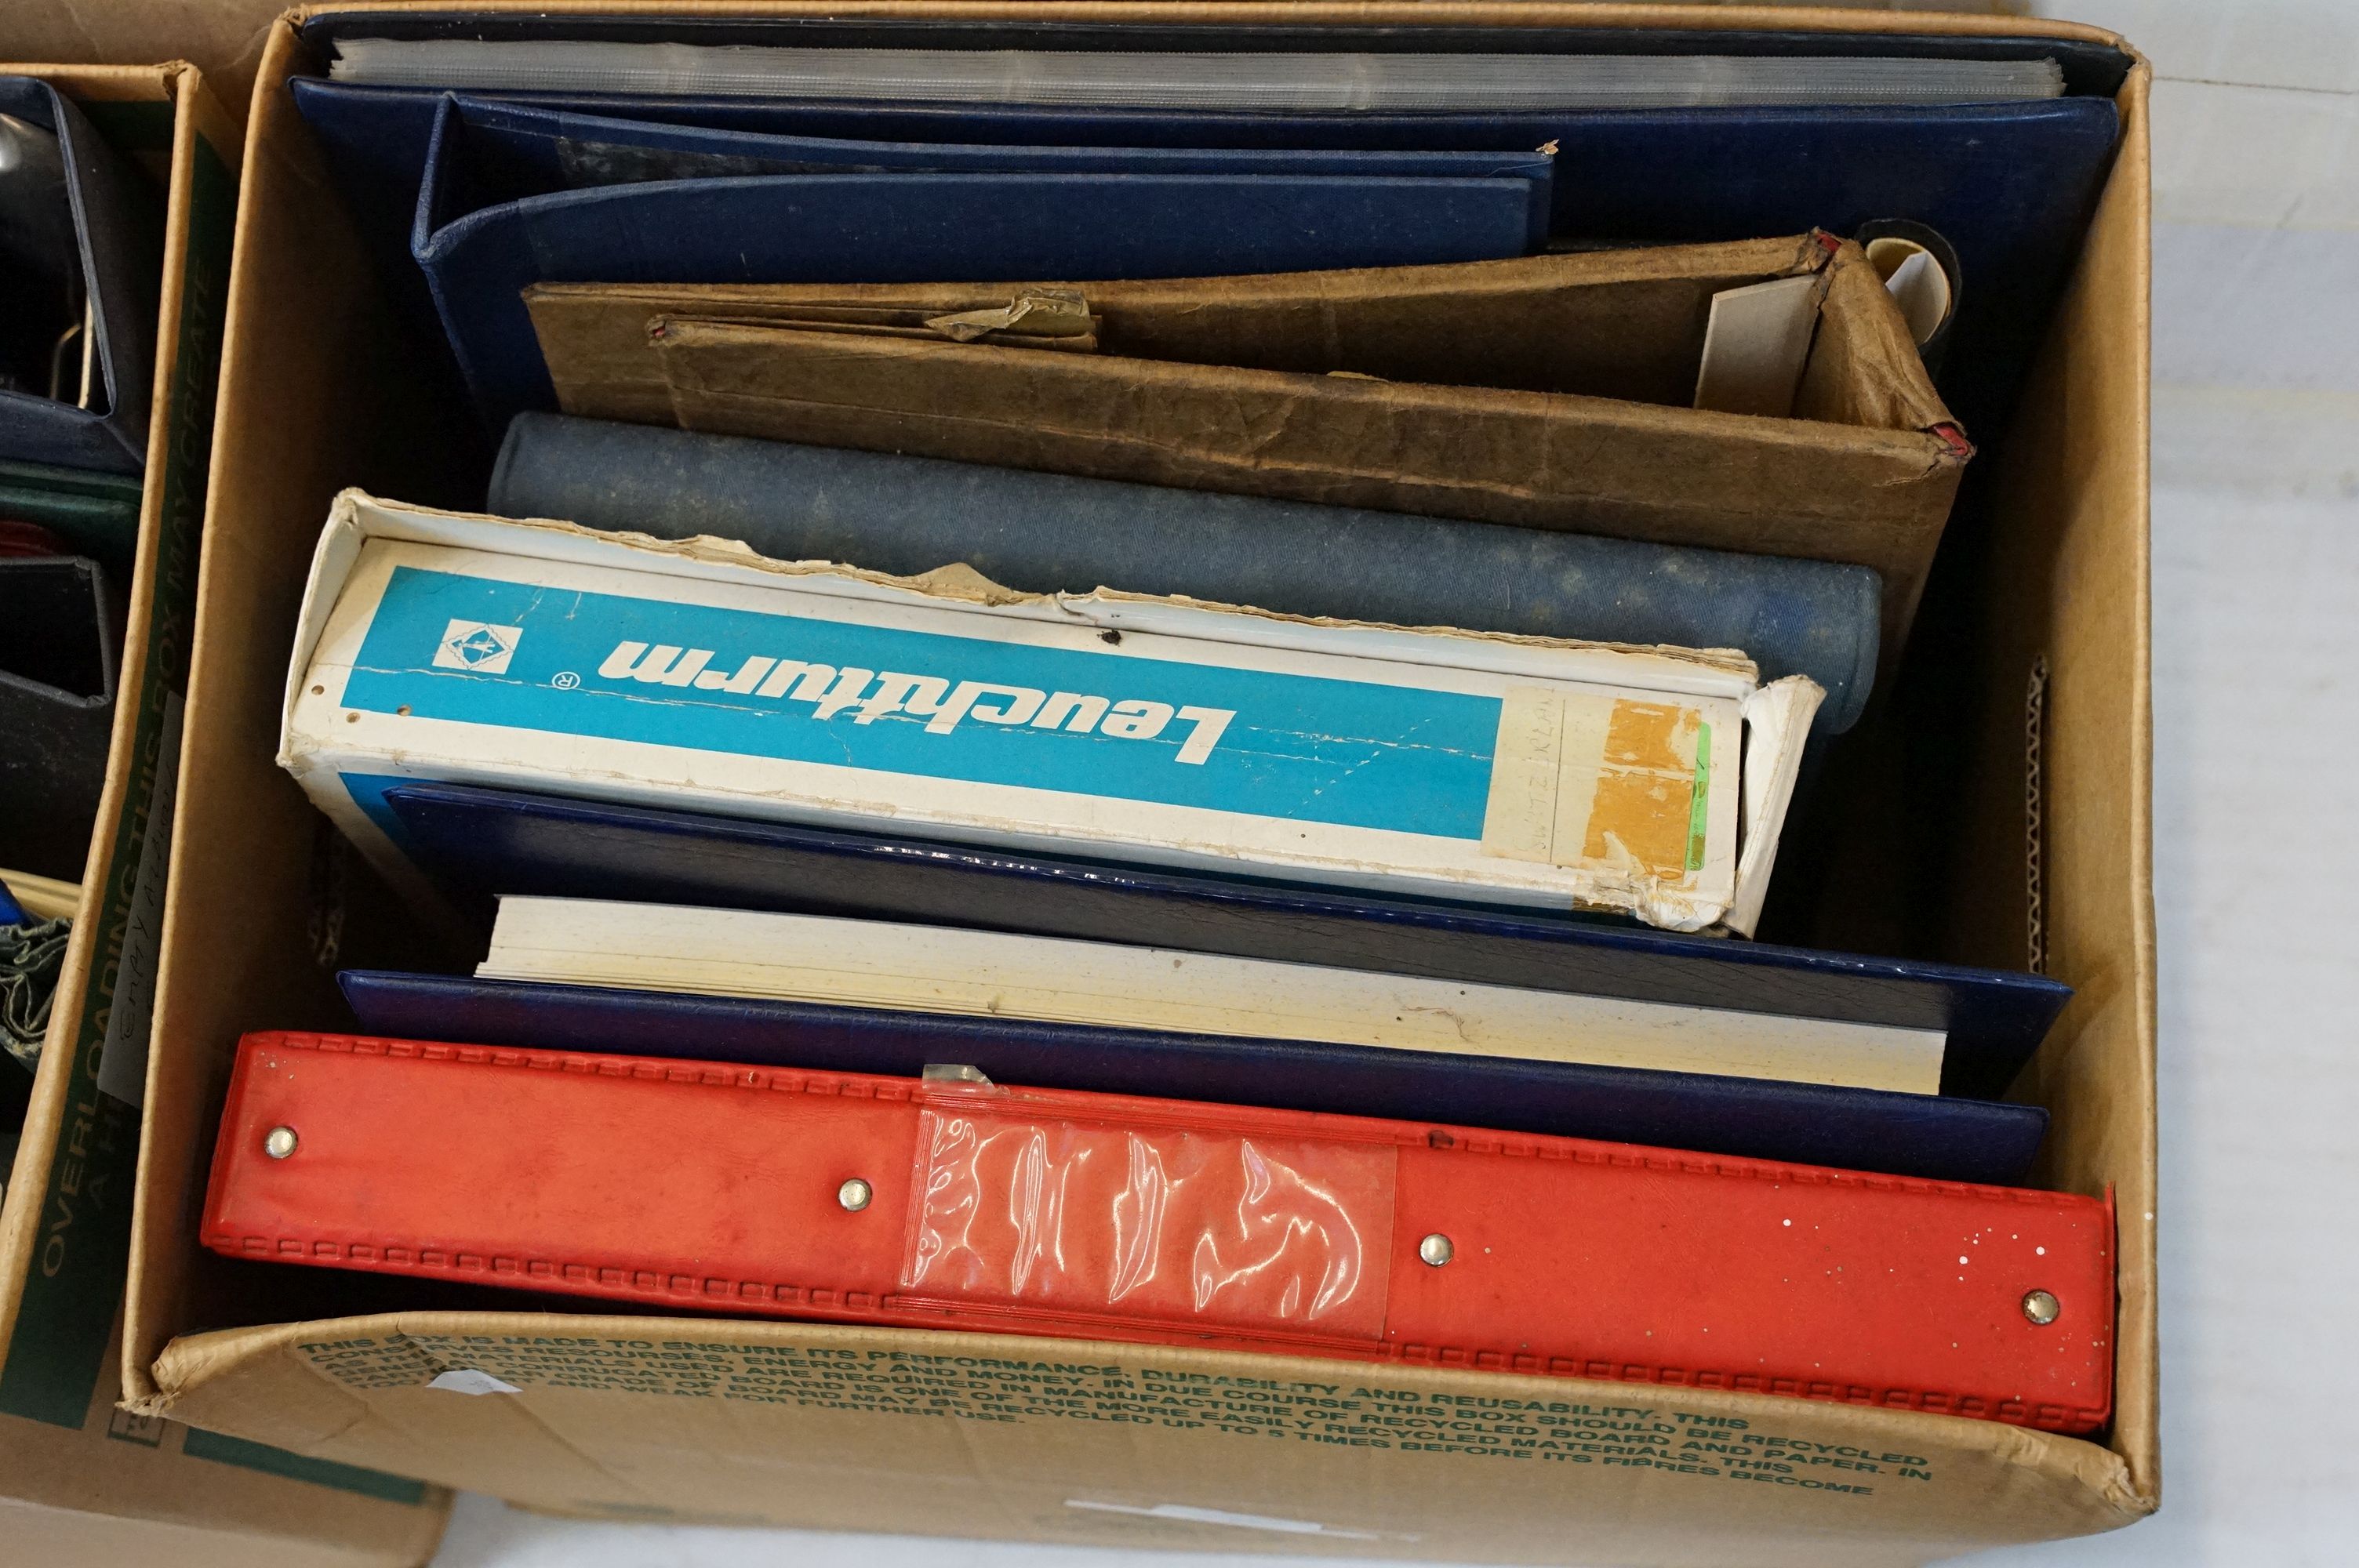 Collection of British & world stamps, together with a collection of empty stamp albums / stockbooks. - Image 10 of 12